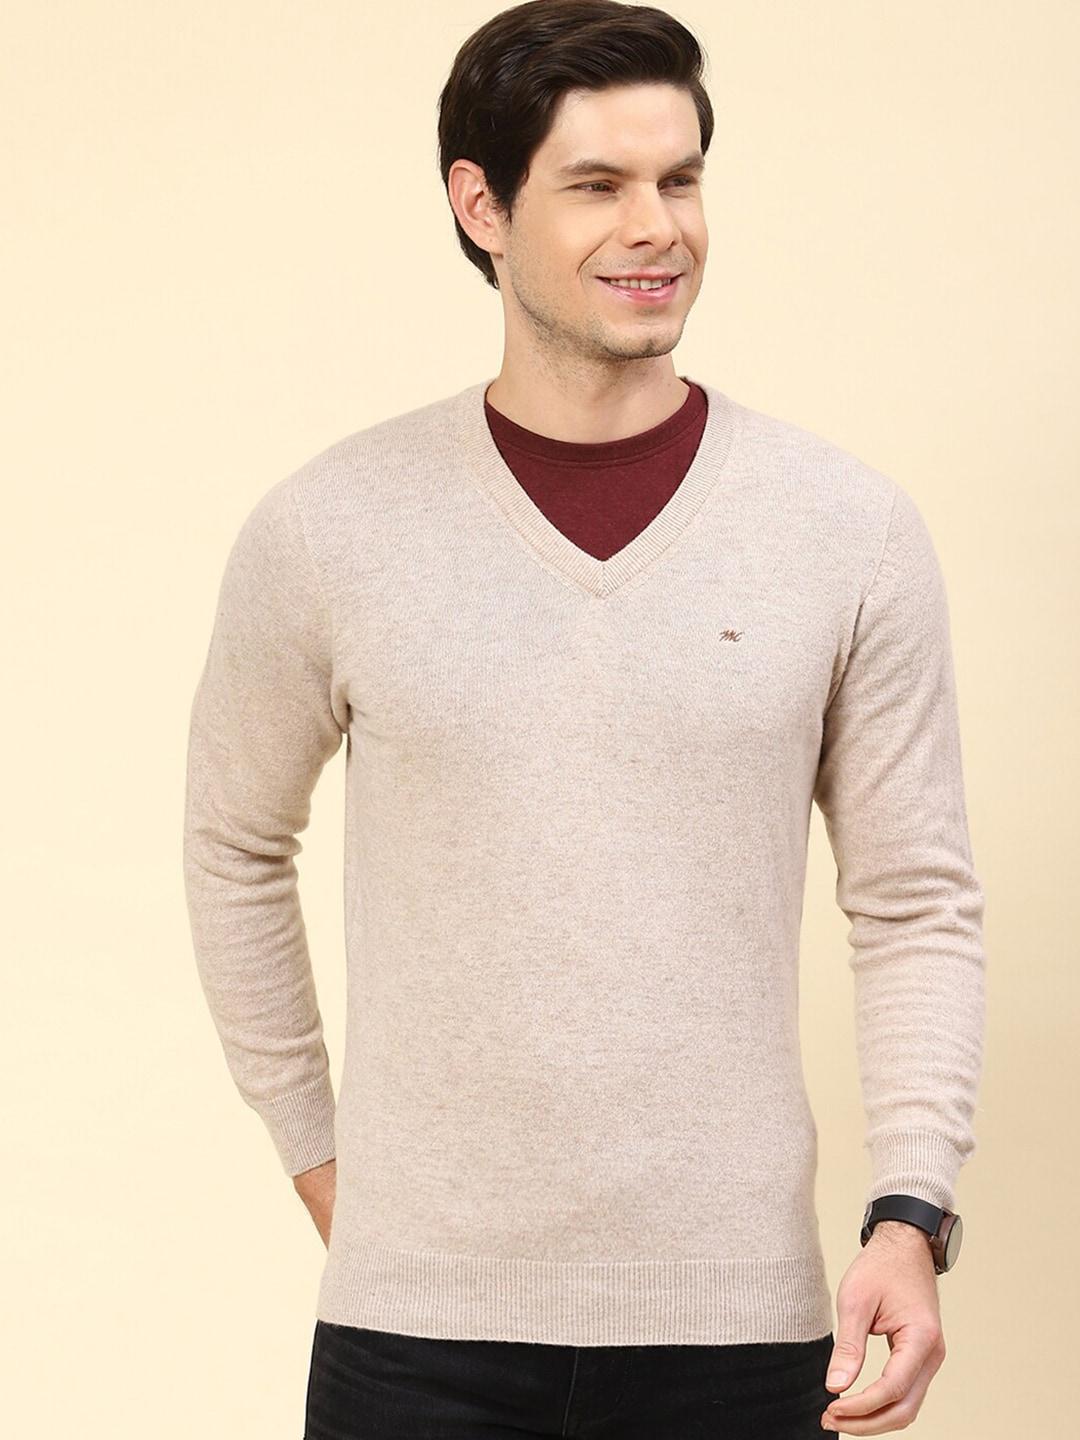 monte-carlo-long-sleeves-v-neck-woollen-pullover